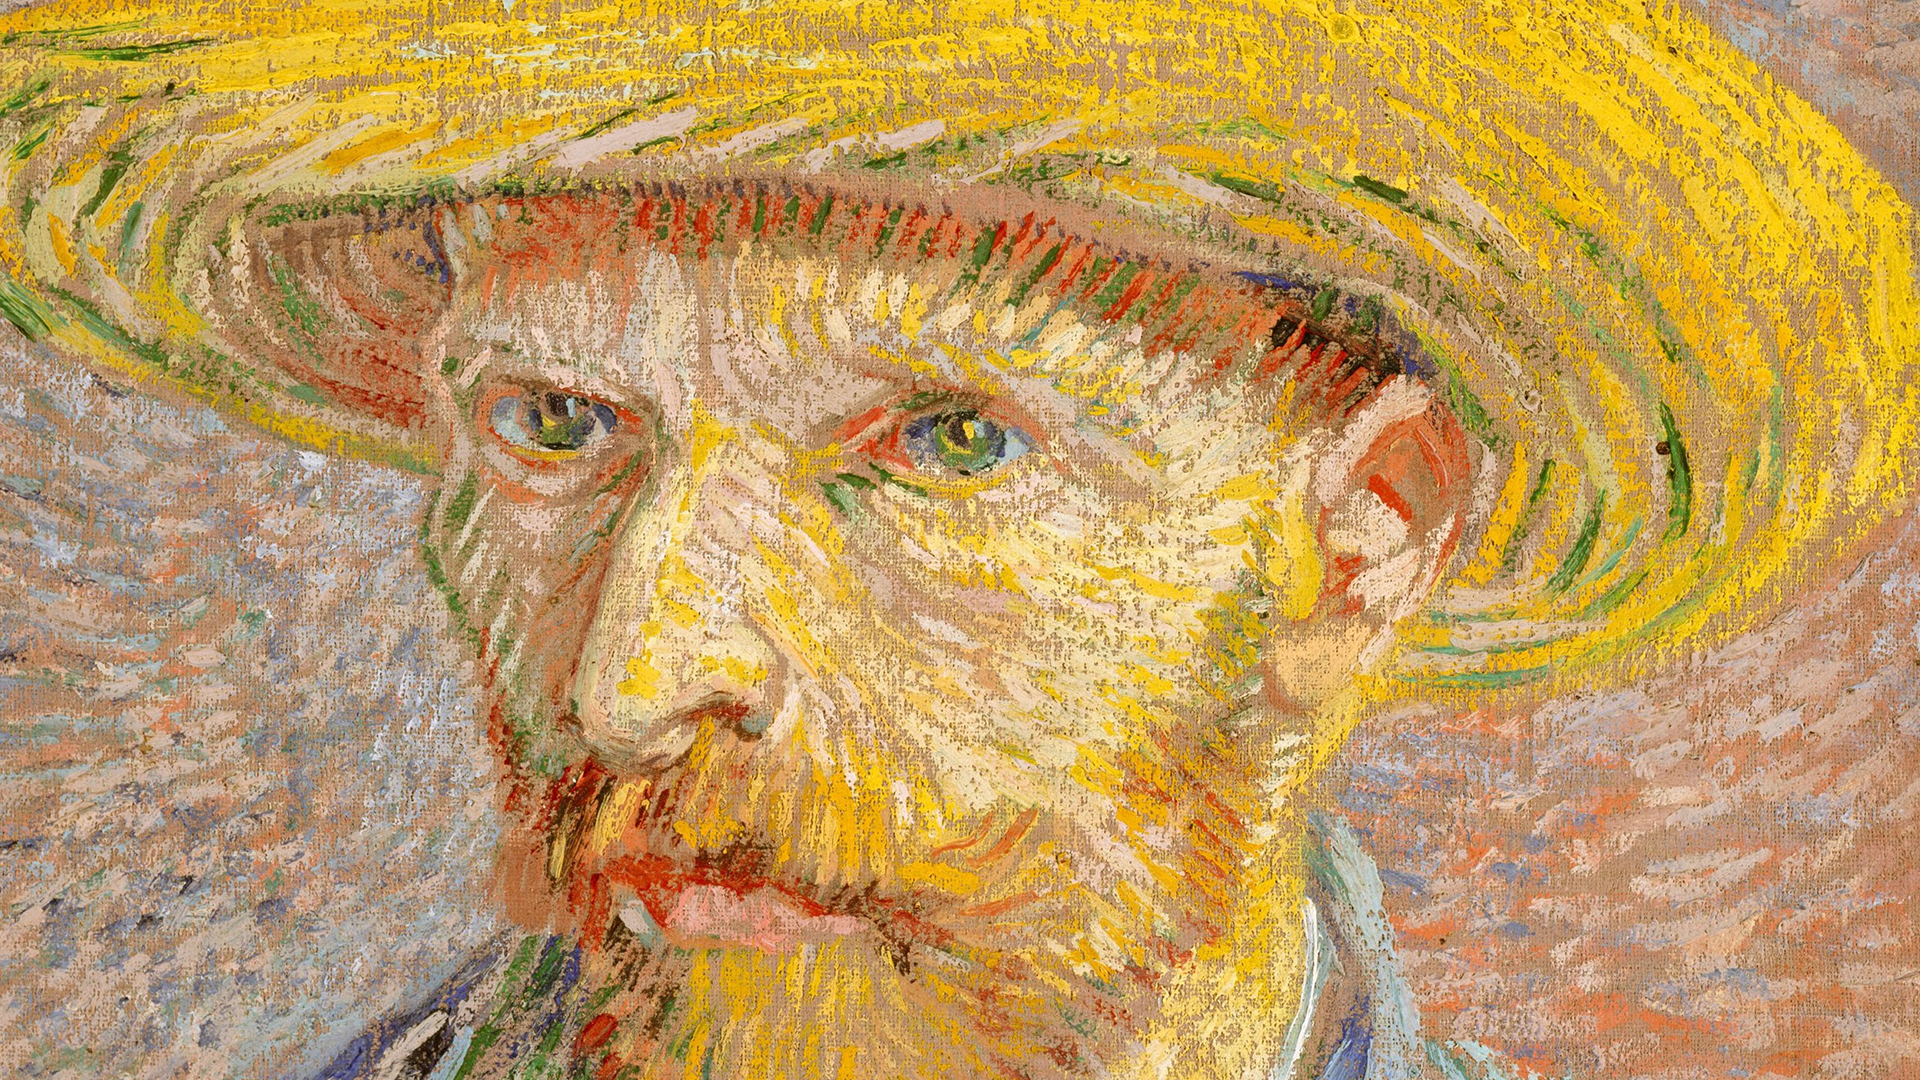 Van Gogh painted his Self Portrait With Straw Hat with the understanding of the relationships of colors